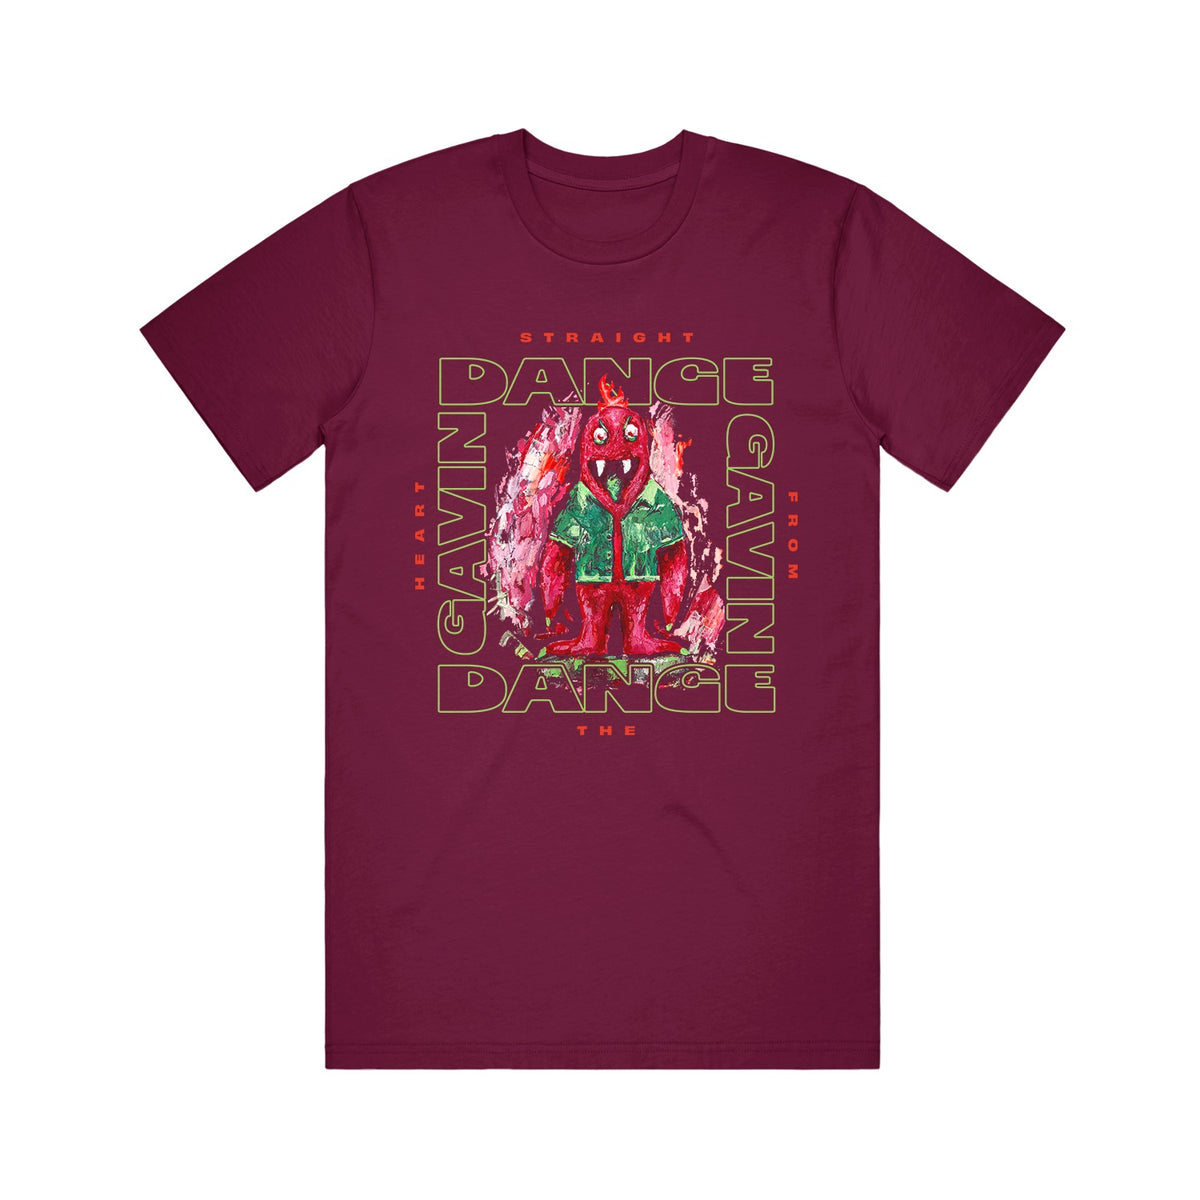 Straight From The Heart - Maroon T-Shirt